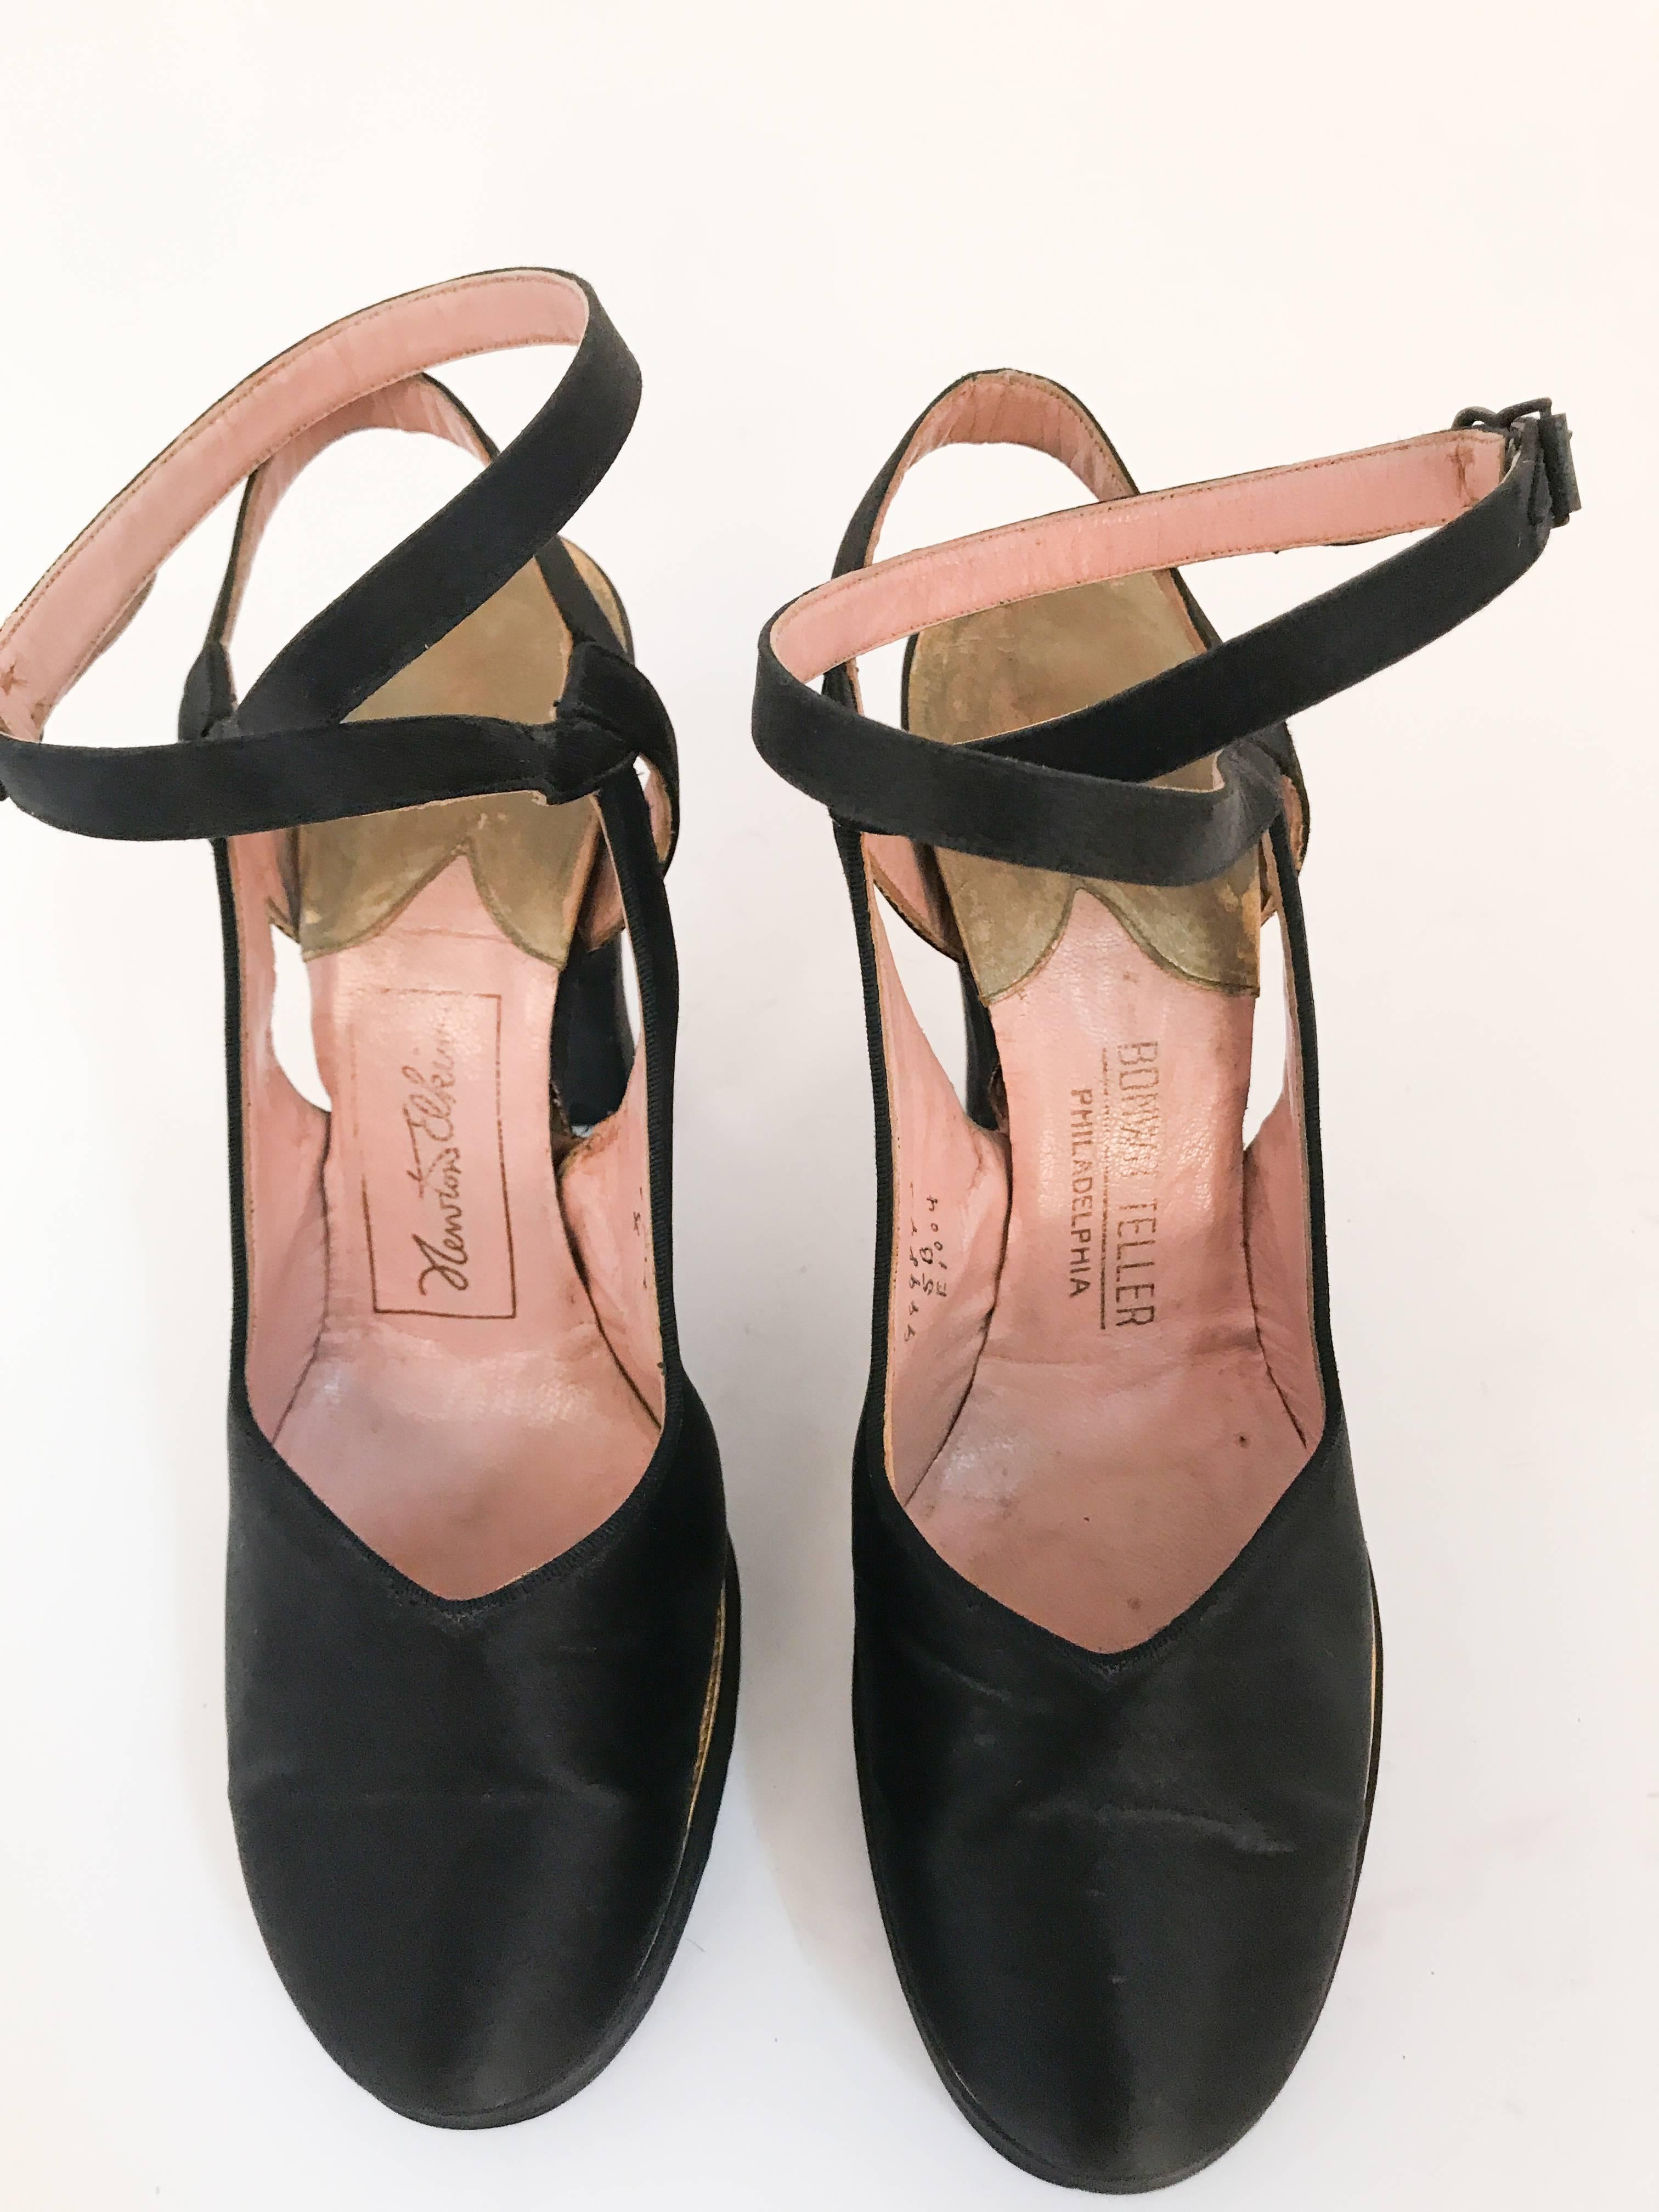 1940s Black and Gold Satin Strap Heels In Good Condition For Sale In San Francisco, CA